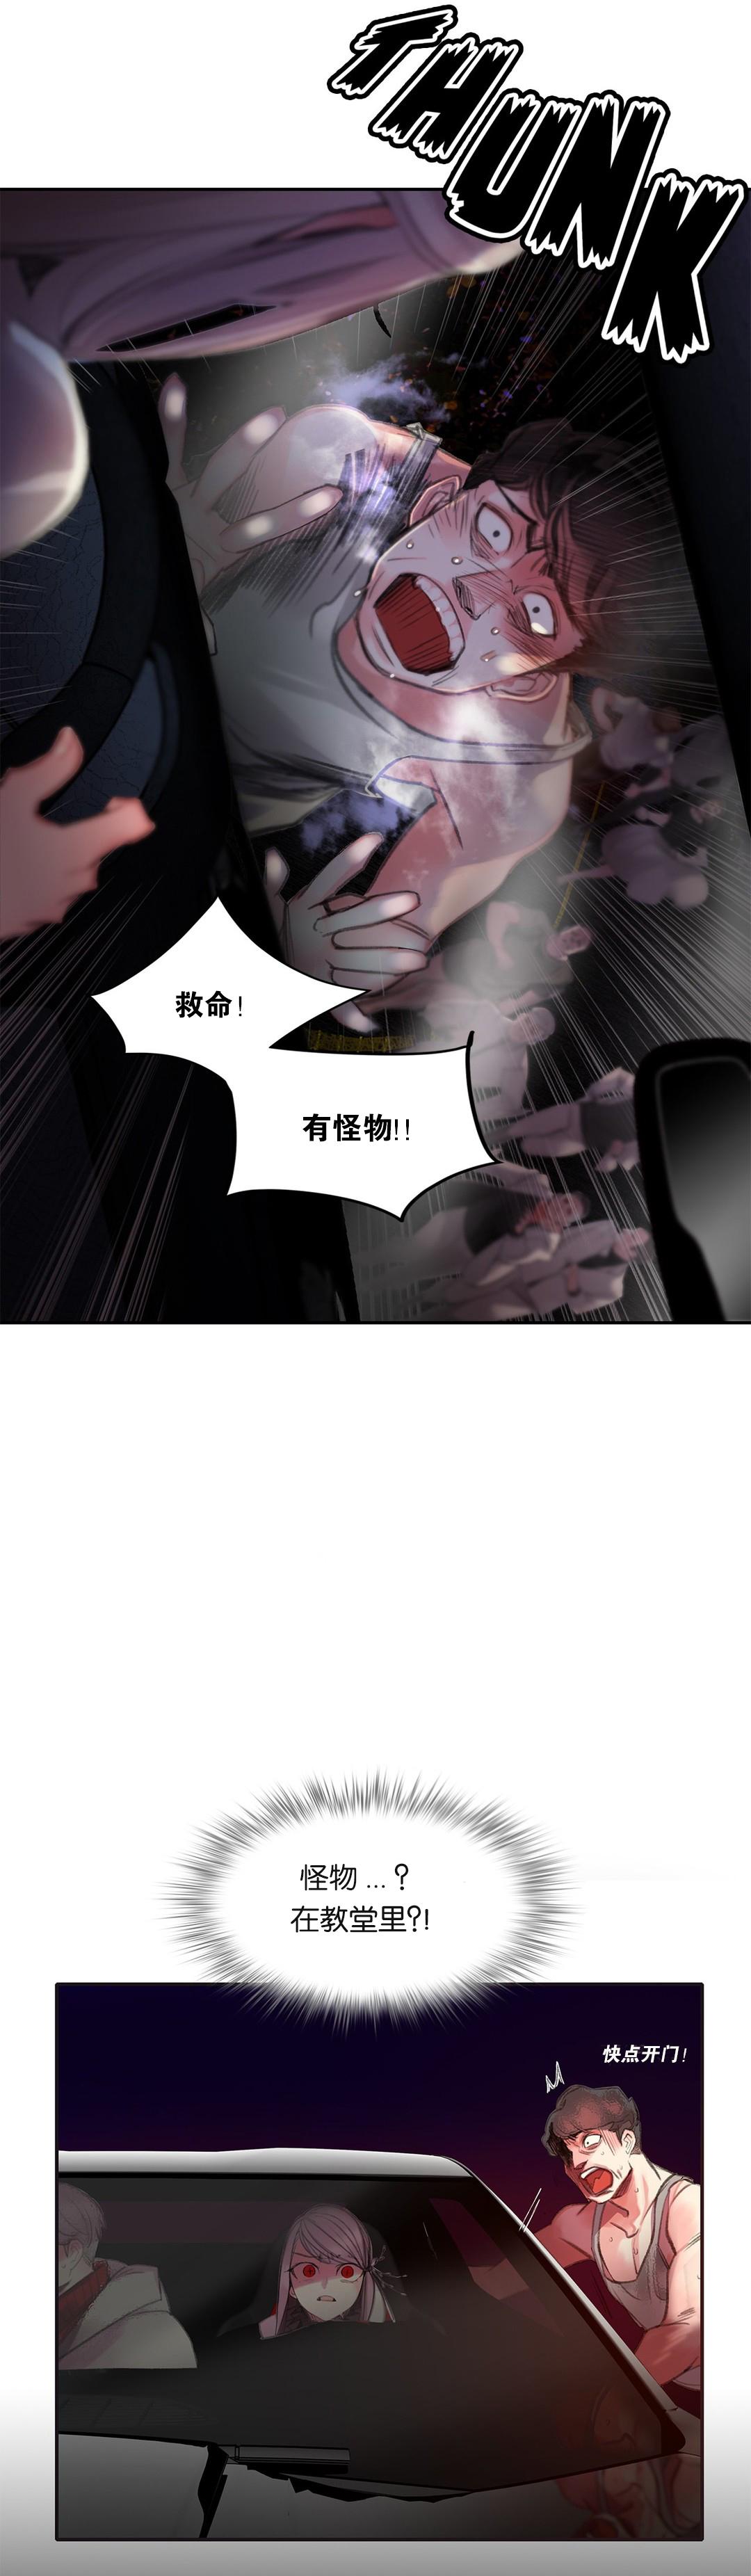 [Juder] Lilith`s Cord (第二季) Ch.61-62 [Chinese] [aaatwist个人汉化] [Ongoing] 14